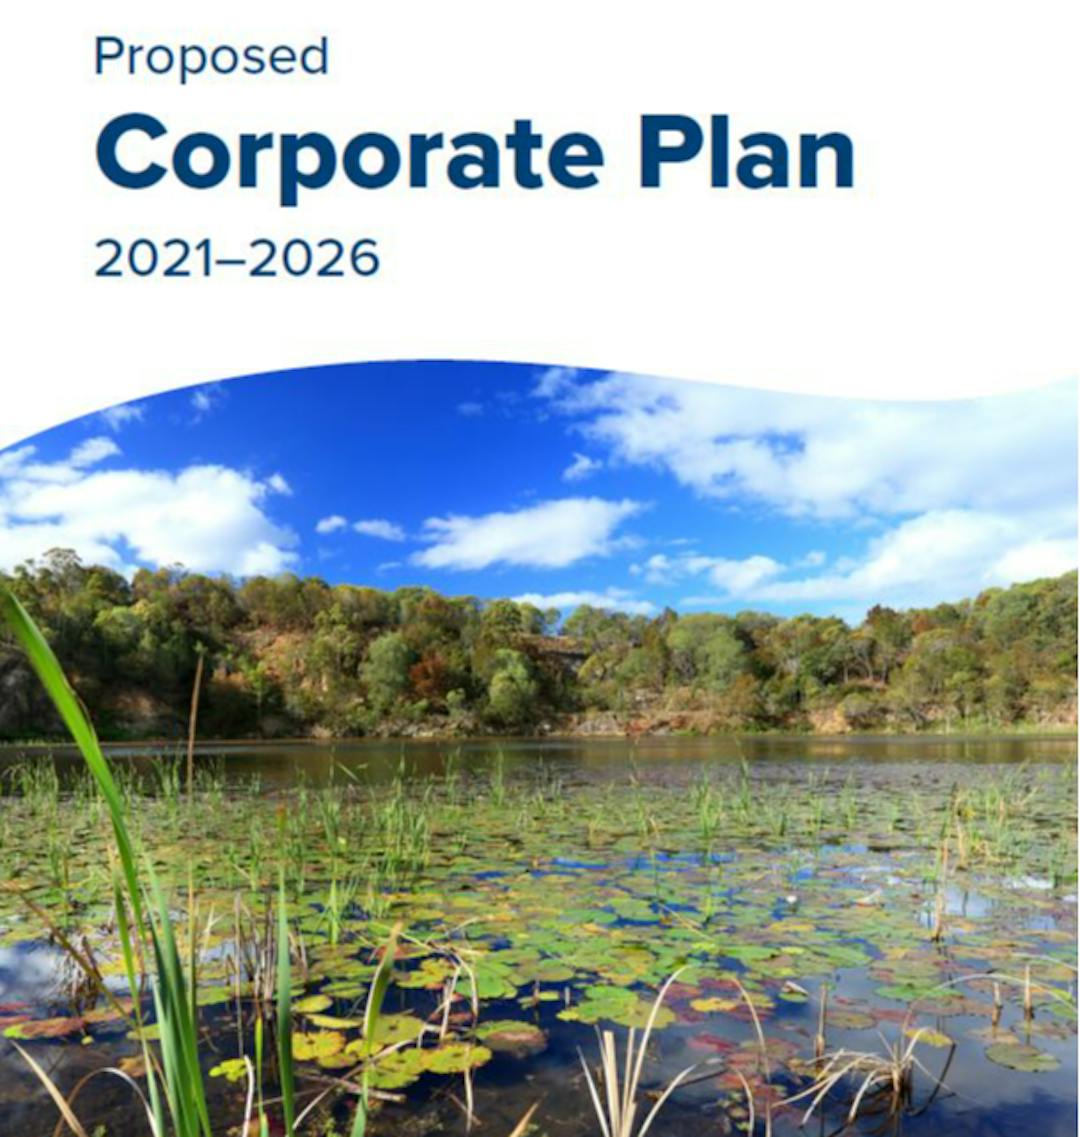 The front page of the proposed corporate plan document